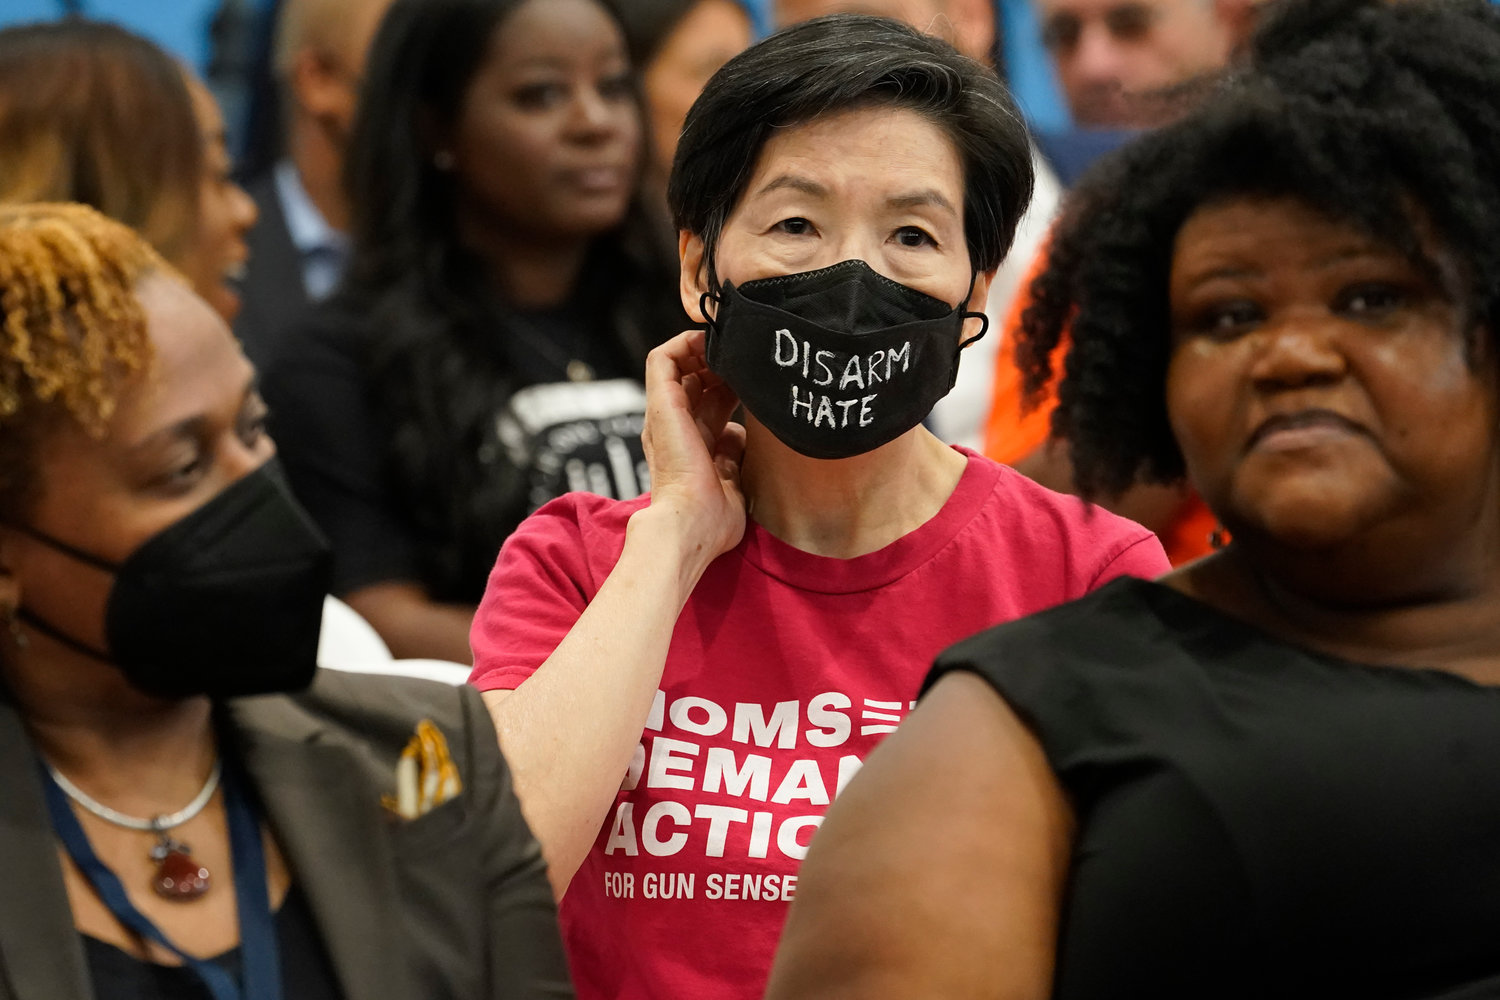 A member of Moms Demand Action wears a face mask denouncing hate during a ceremony where Gov. Kathy Hochul signed a package of bills to strengthen gun laws, Monday, June 6, 2022, in New York. (AP Photo/Mary Altaffer)